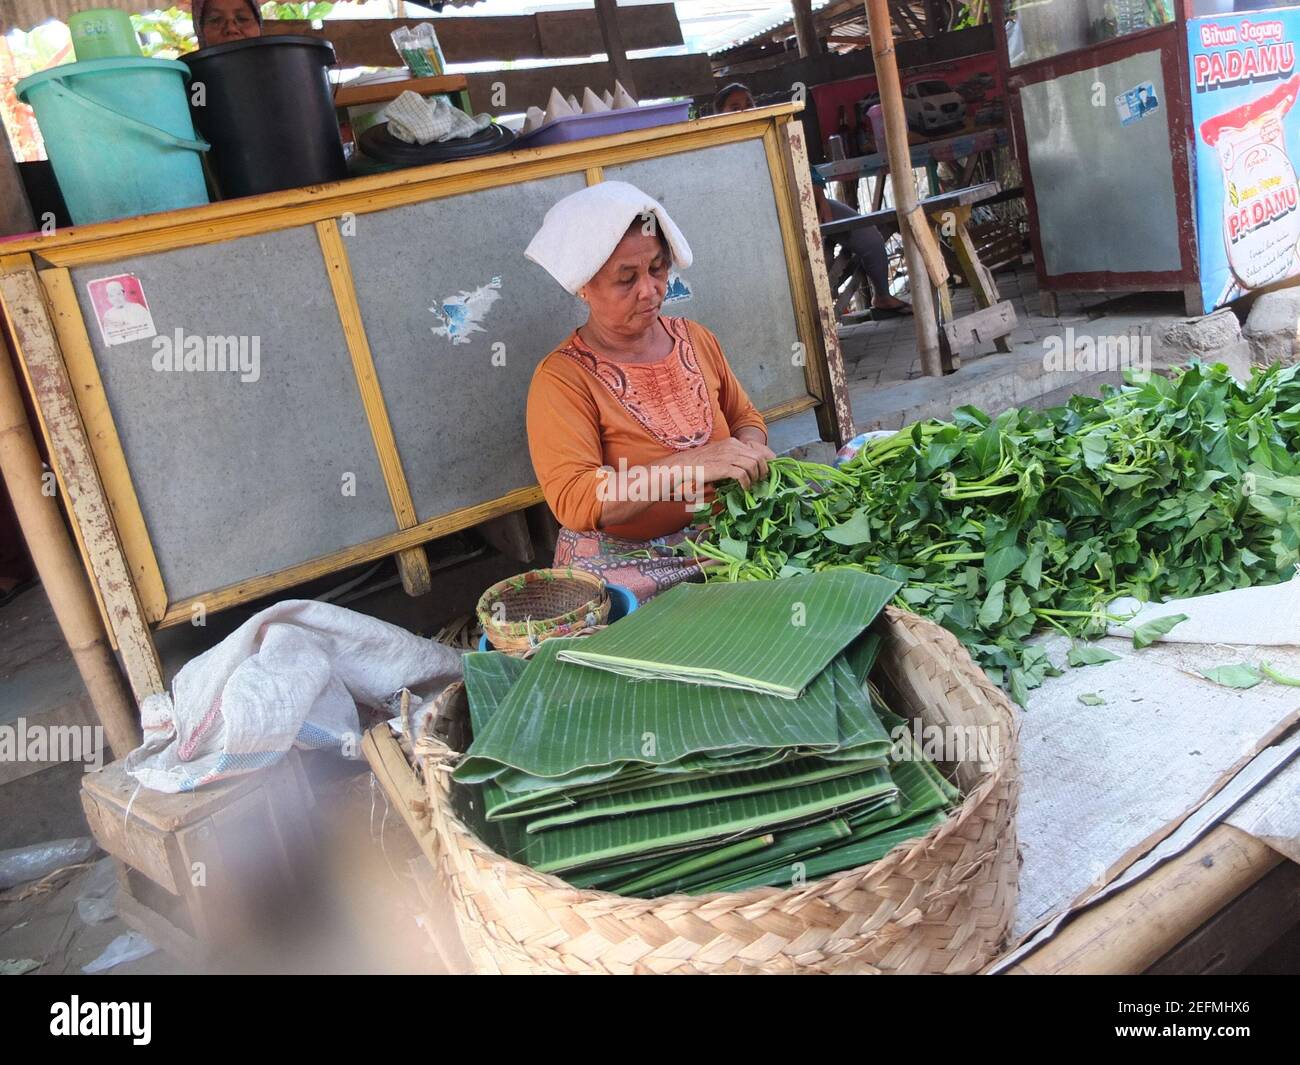 Banana leaves being sold at a market in Bali Stock Photo